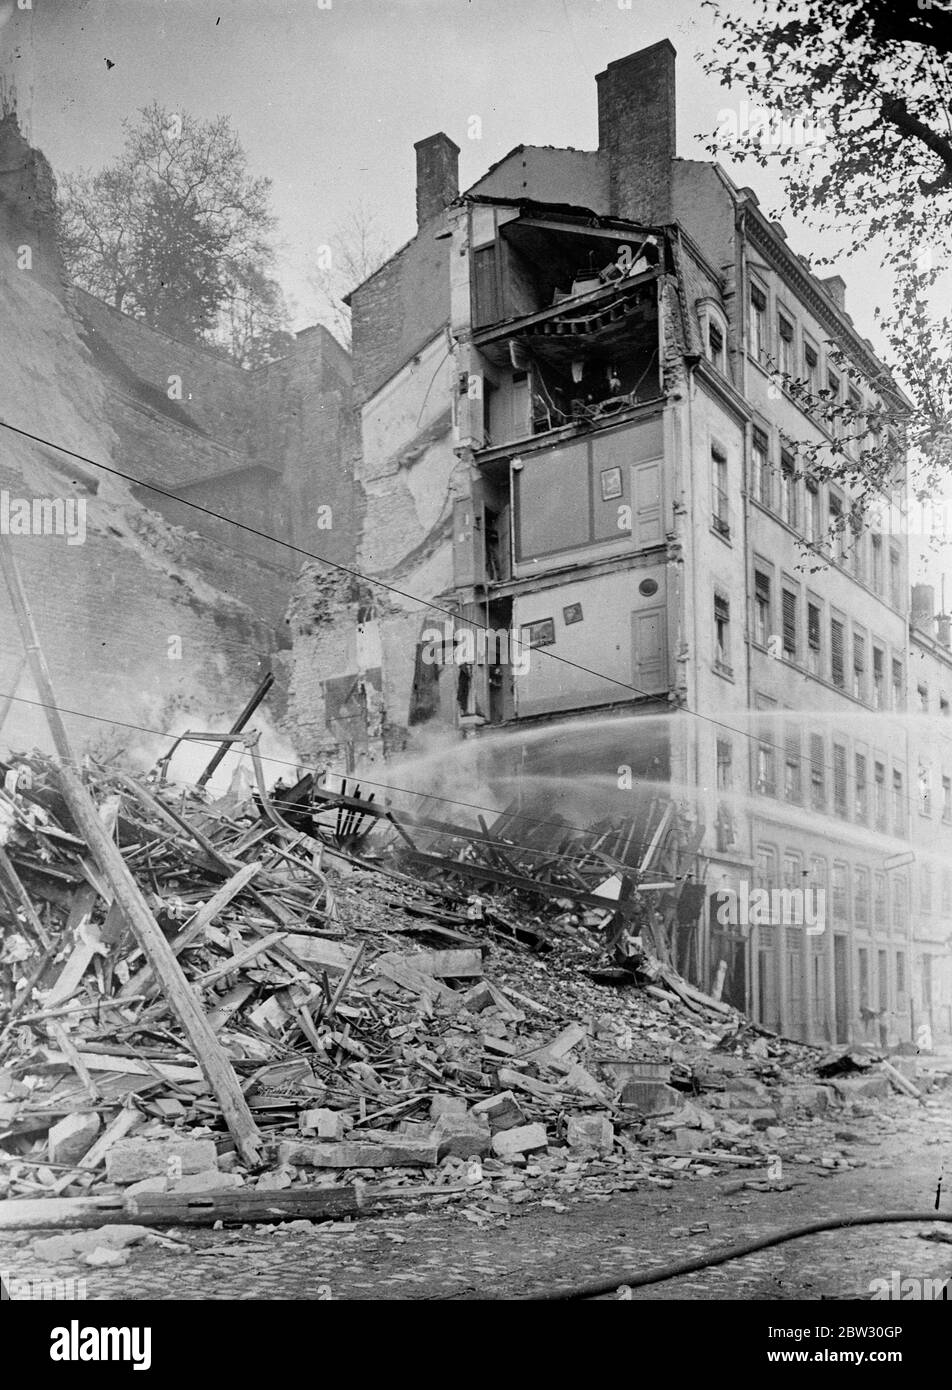 Thirty dead in Lyons landslide . Thirty people are believed to have lost their lives when a landslip wrecked two houses at the foot of Croix Rousse Hill , Lyons , France . Fire broke out adding to the disaster . The scene of the disaster at Lyons . 9 May 1932 Stock Photo